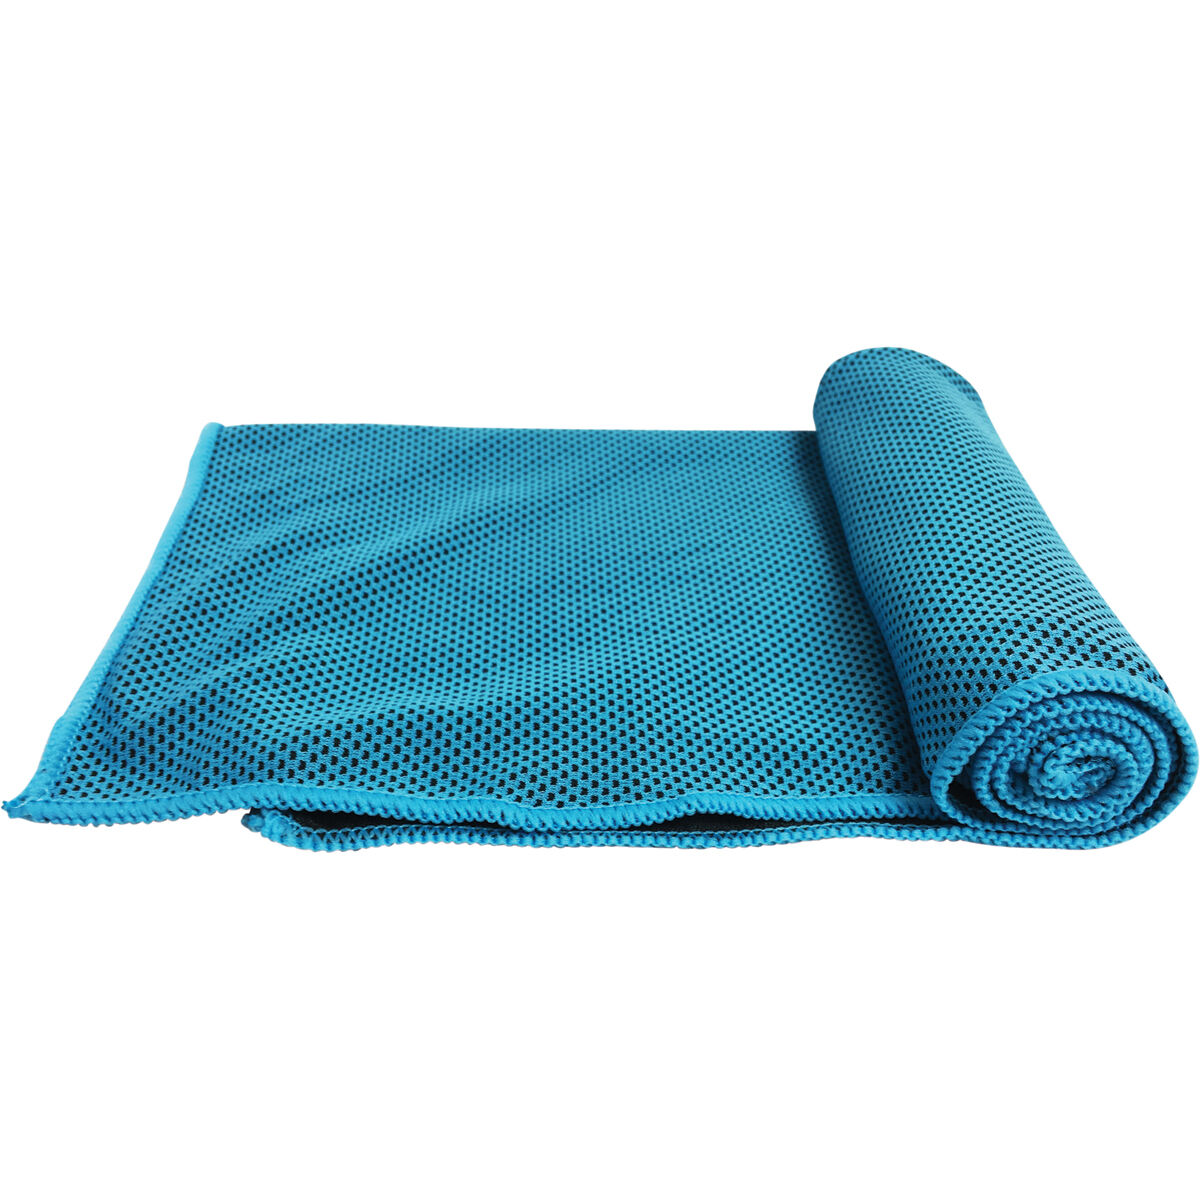 cooling towel with beads